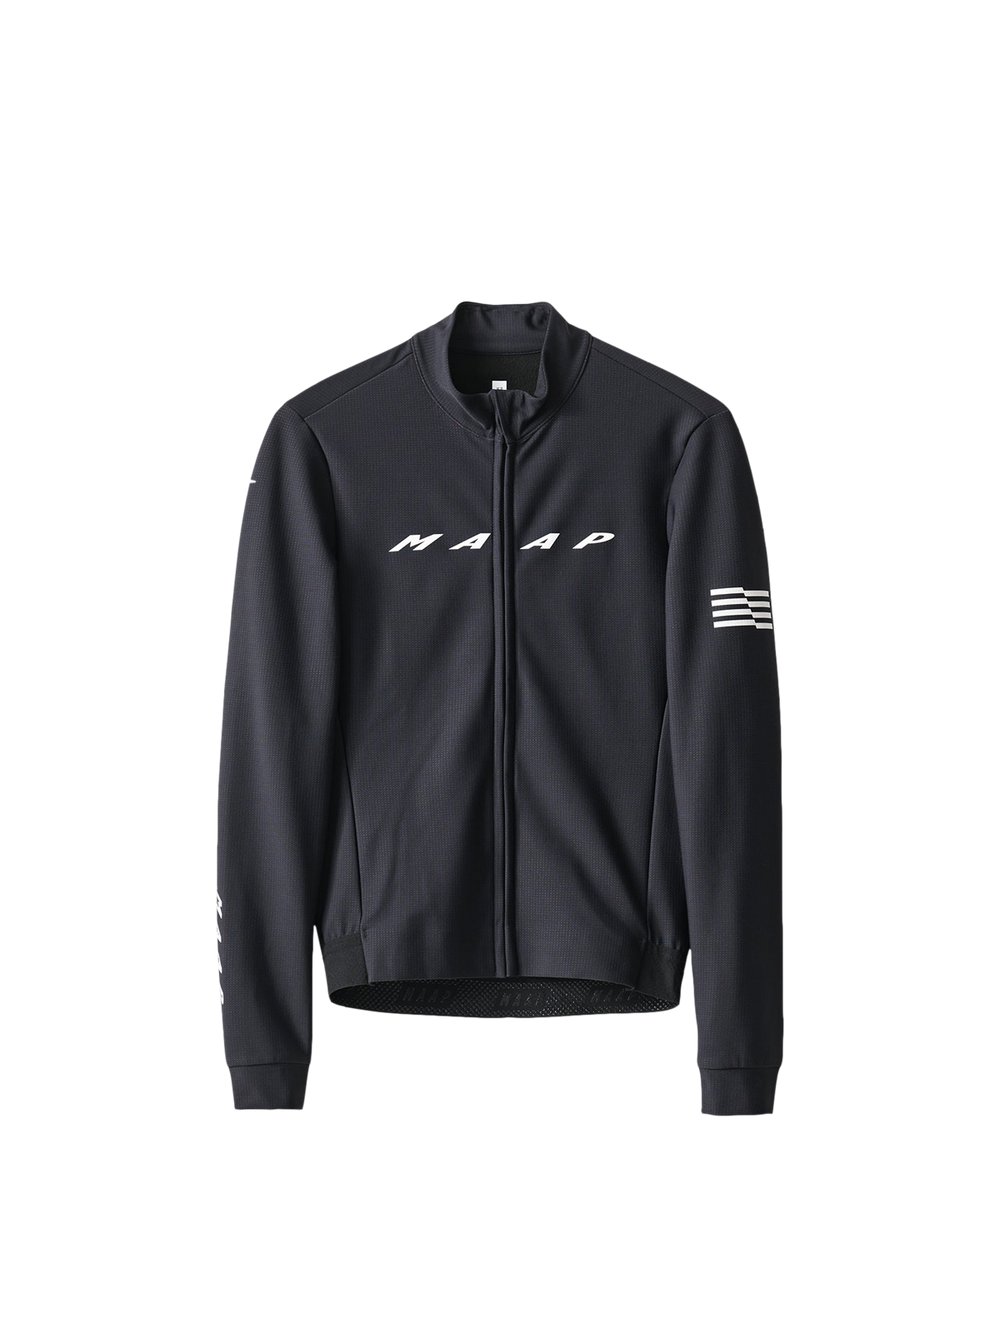 Product Image for Evade Thermal LS Jersey 2.0